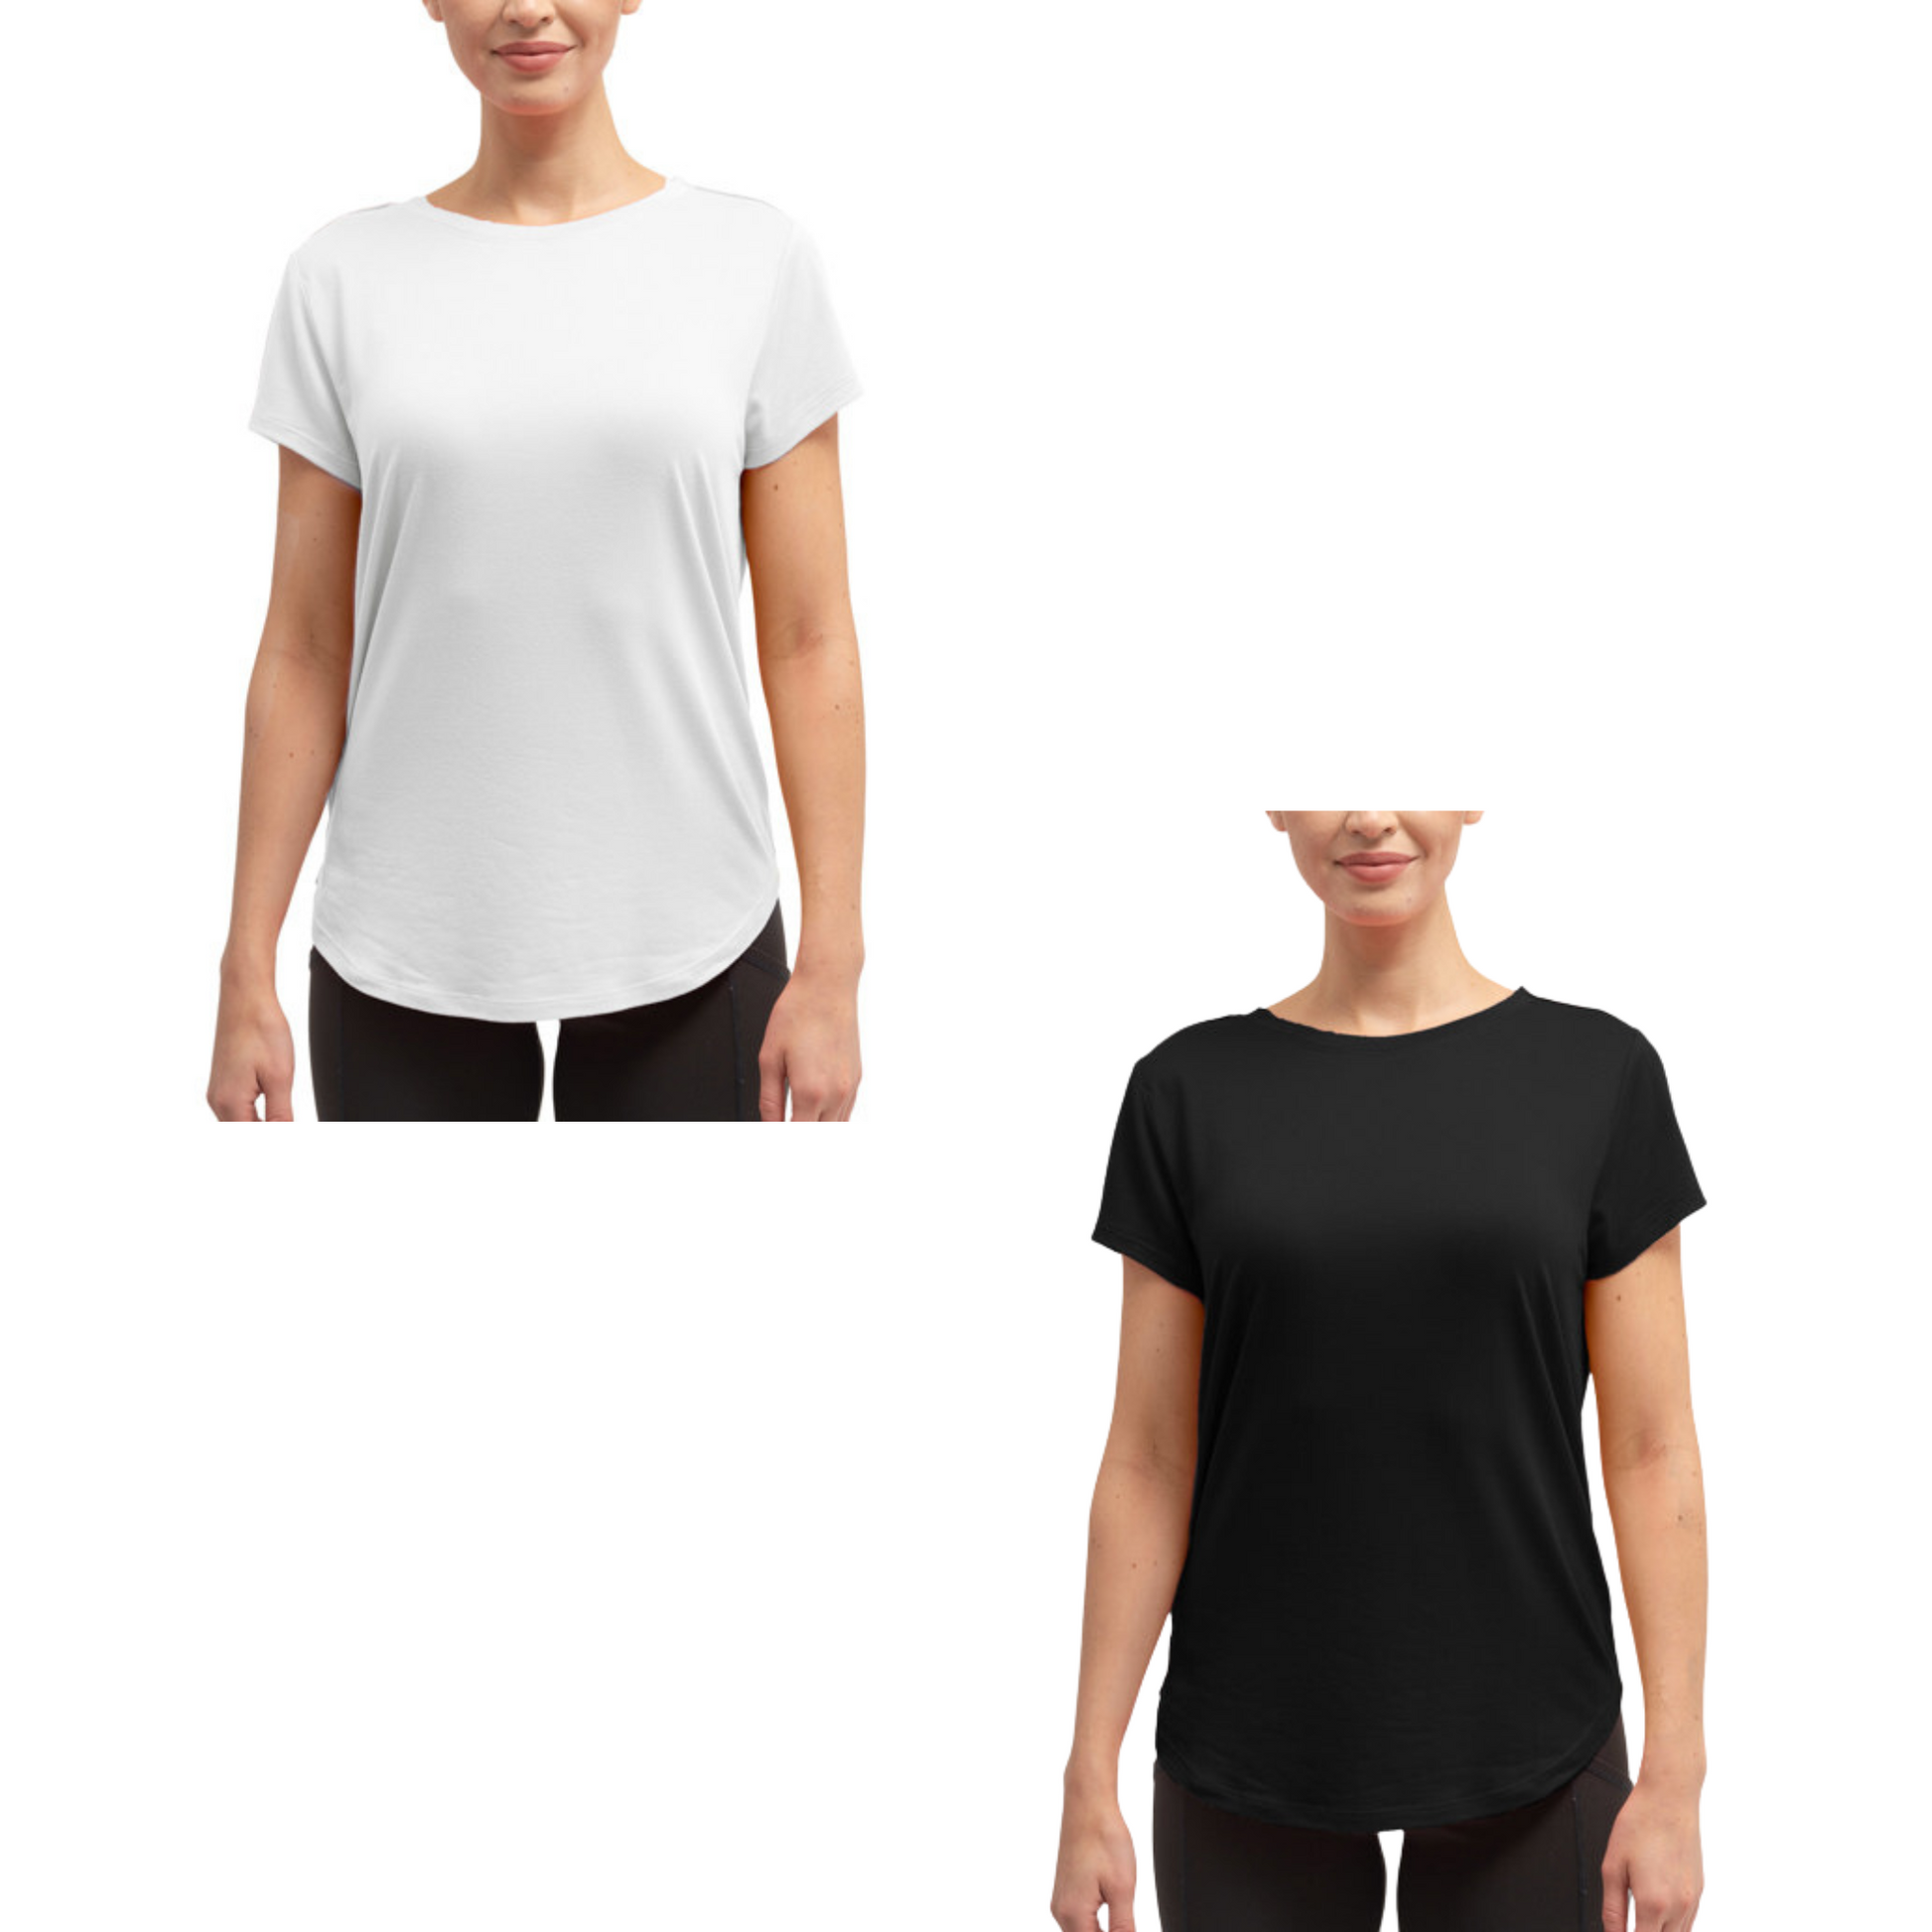 super soft dream tee. Can be worn as everyday wear, or loungewear. Available in black and white